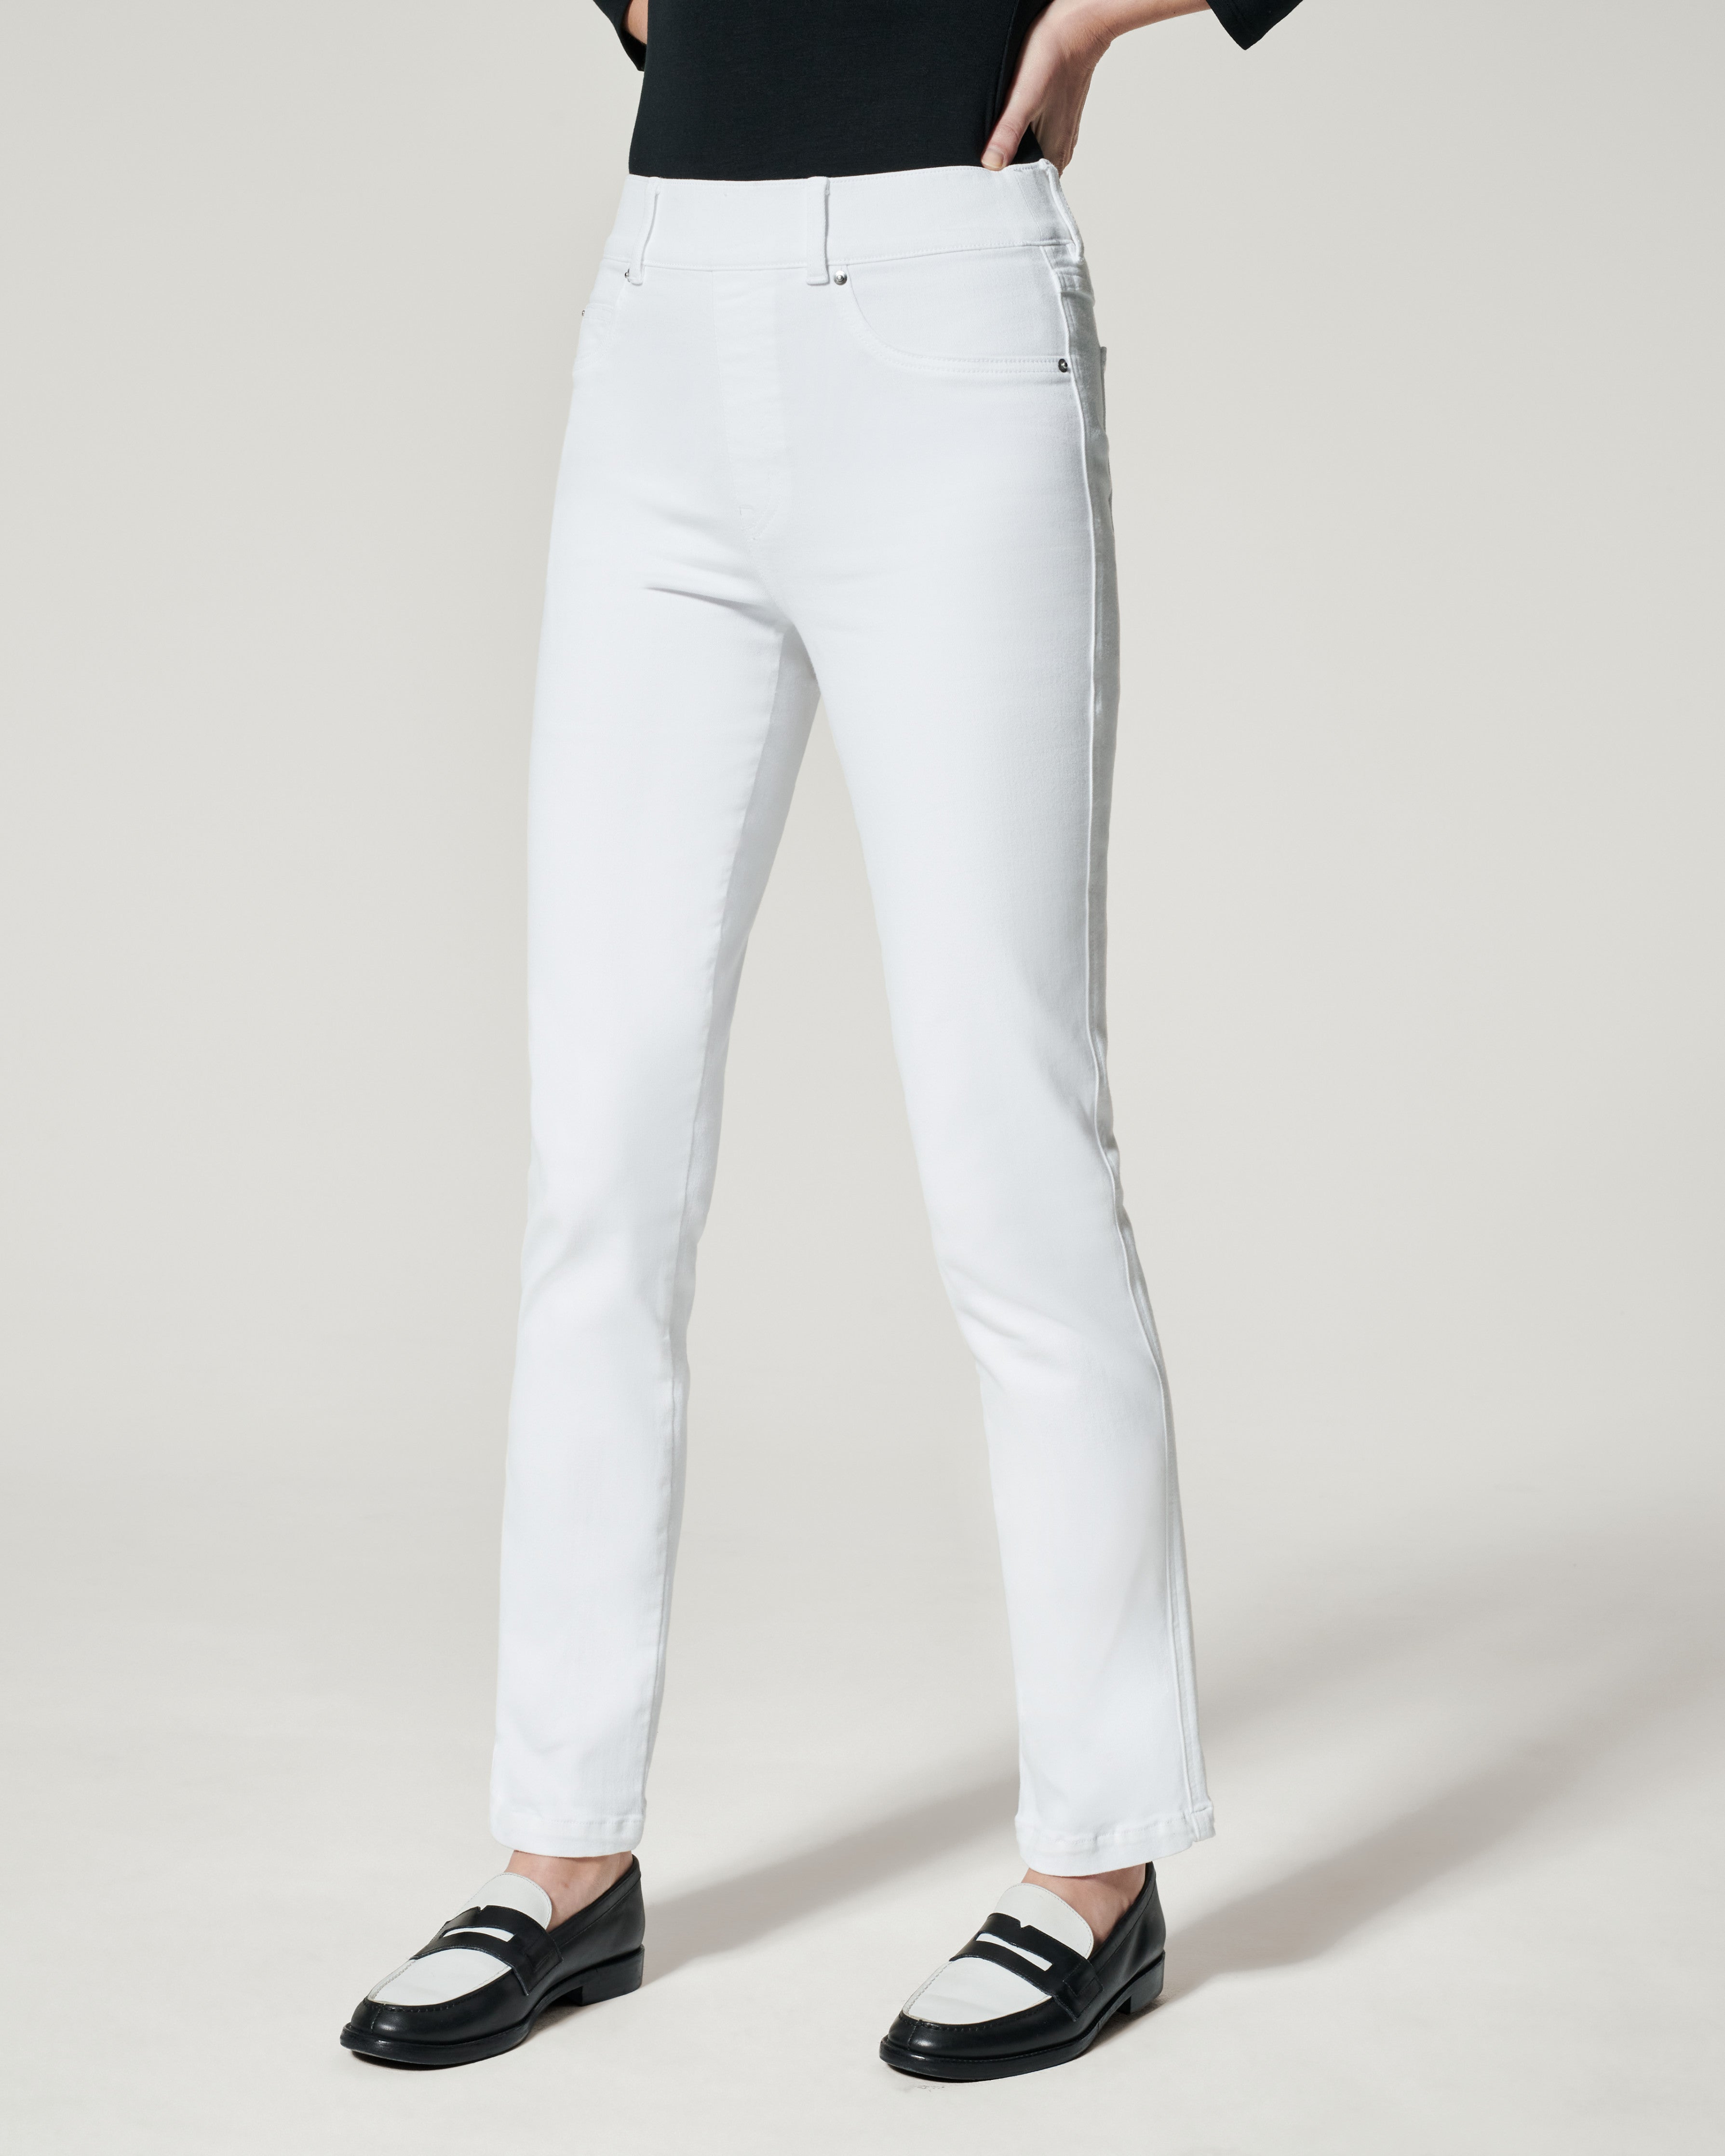 NWT New $98 SPANX Jean-ish Ankle Leggings WHITE Jeans Jeggings